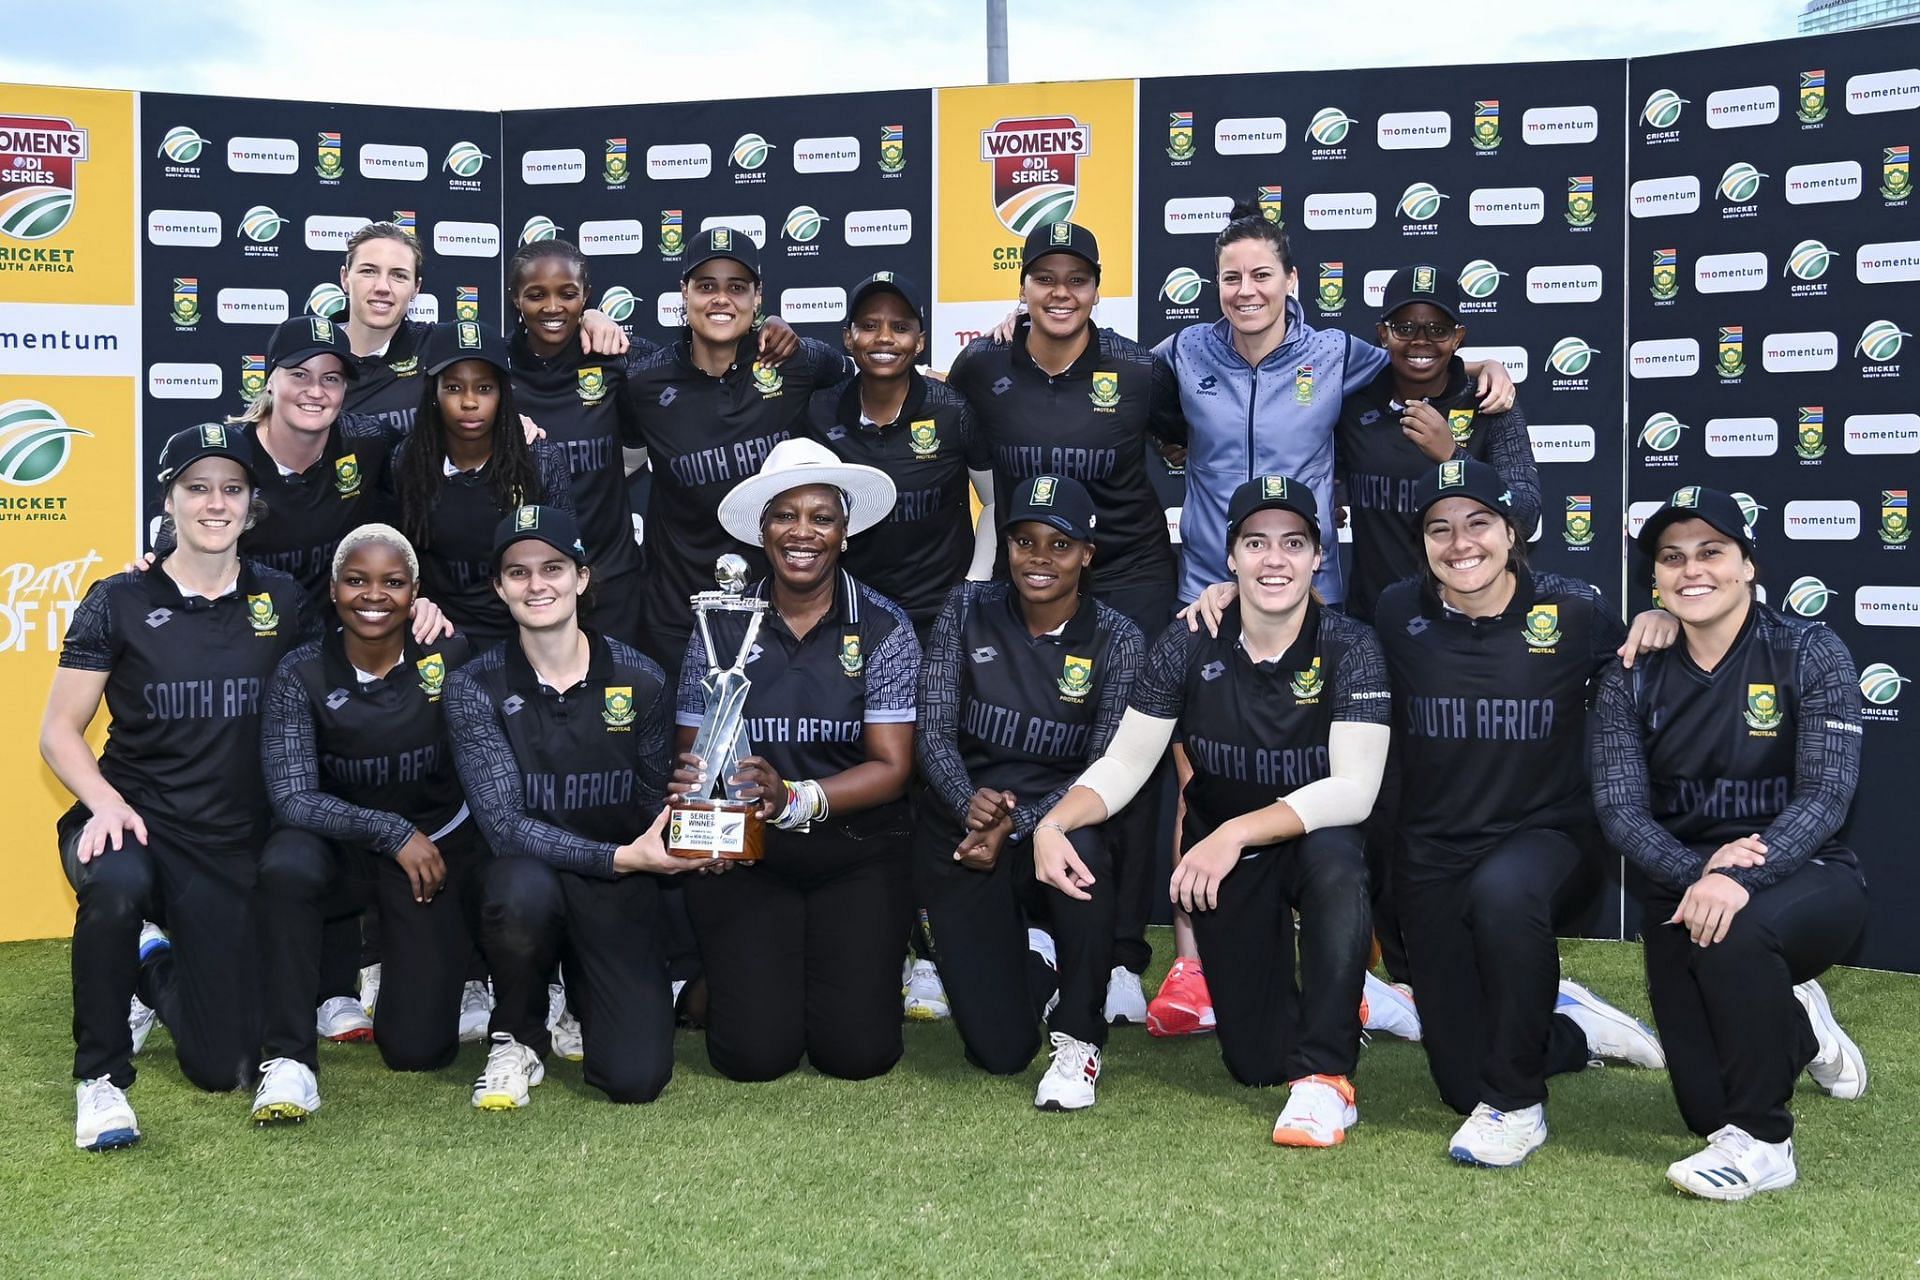 South Africa Women posing after winning the ODI Series against New Zealand